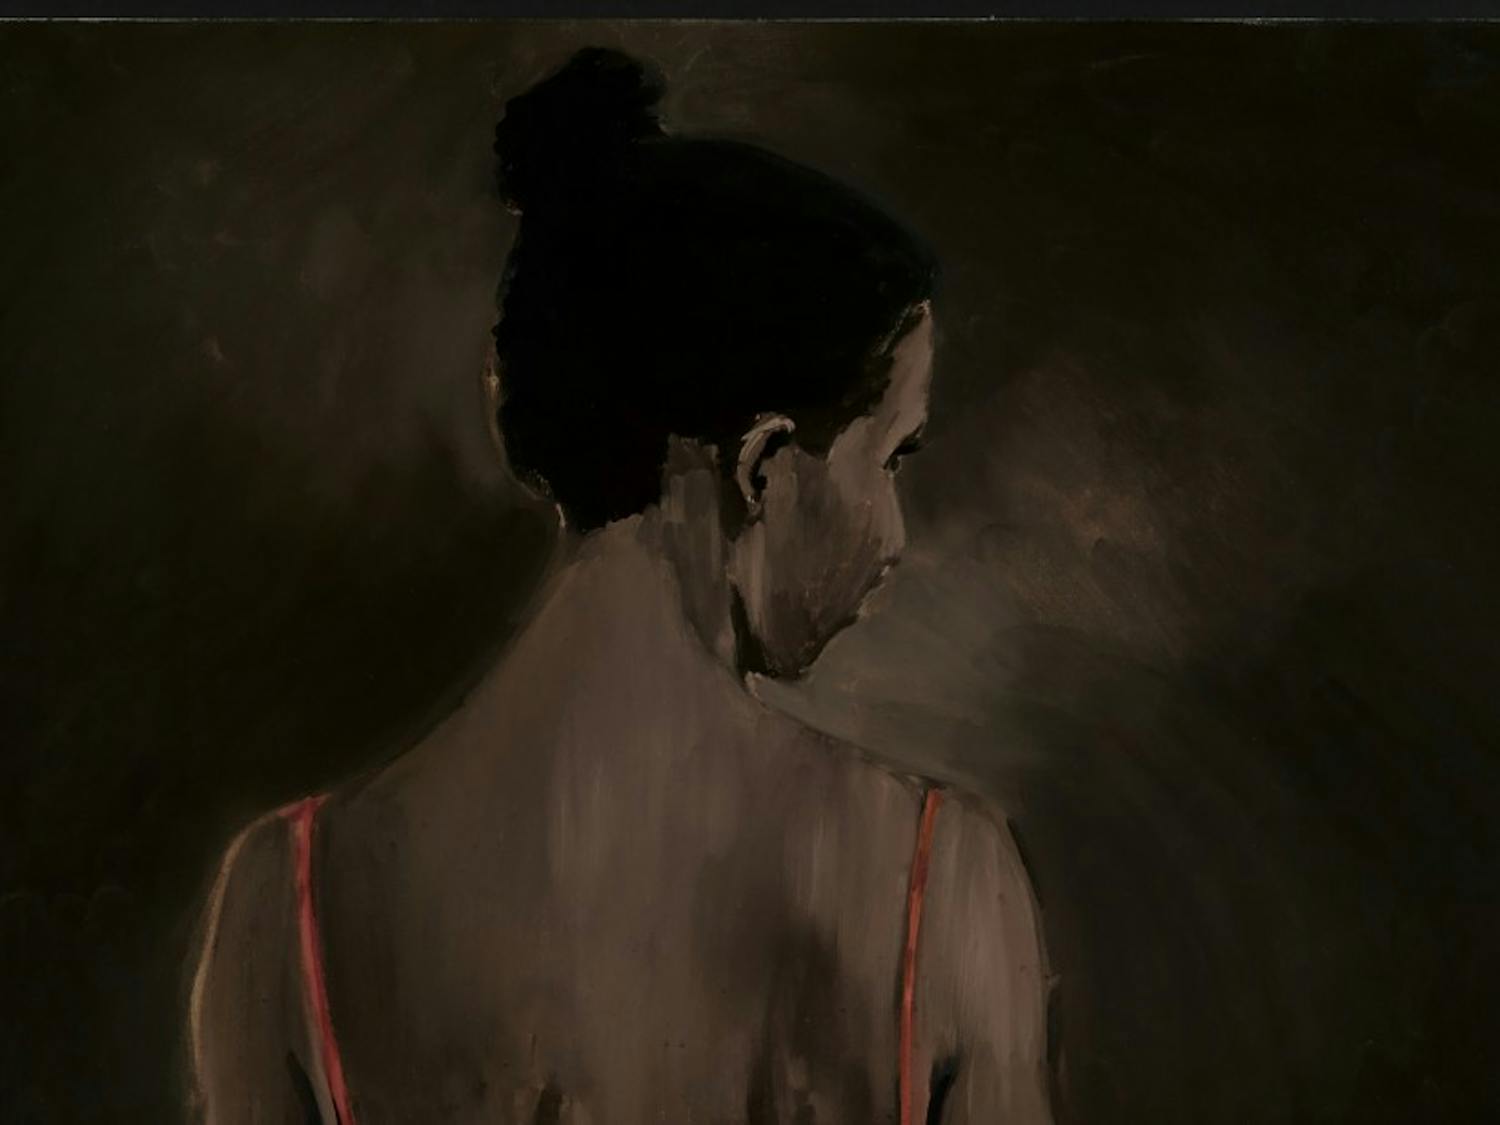 Lynette Yiadom-Boakye's "Places to Love For" is featured in "Solidary & Solitary: The Joyner/Giuffrida Collection," which opened Thursday and will run through July 15.